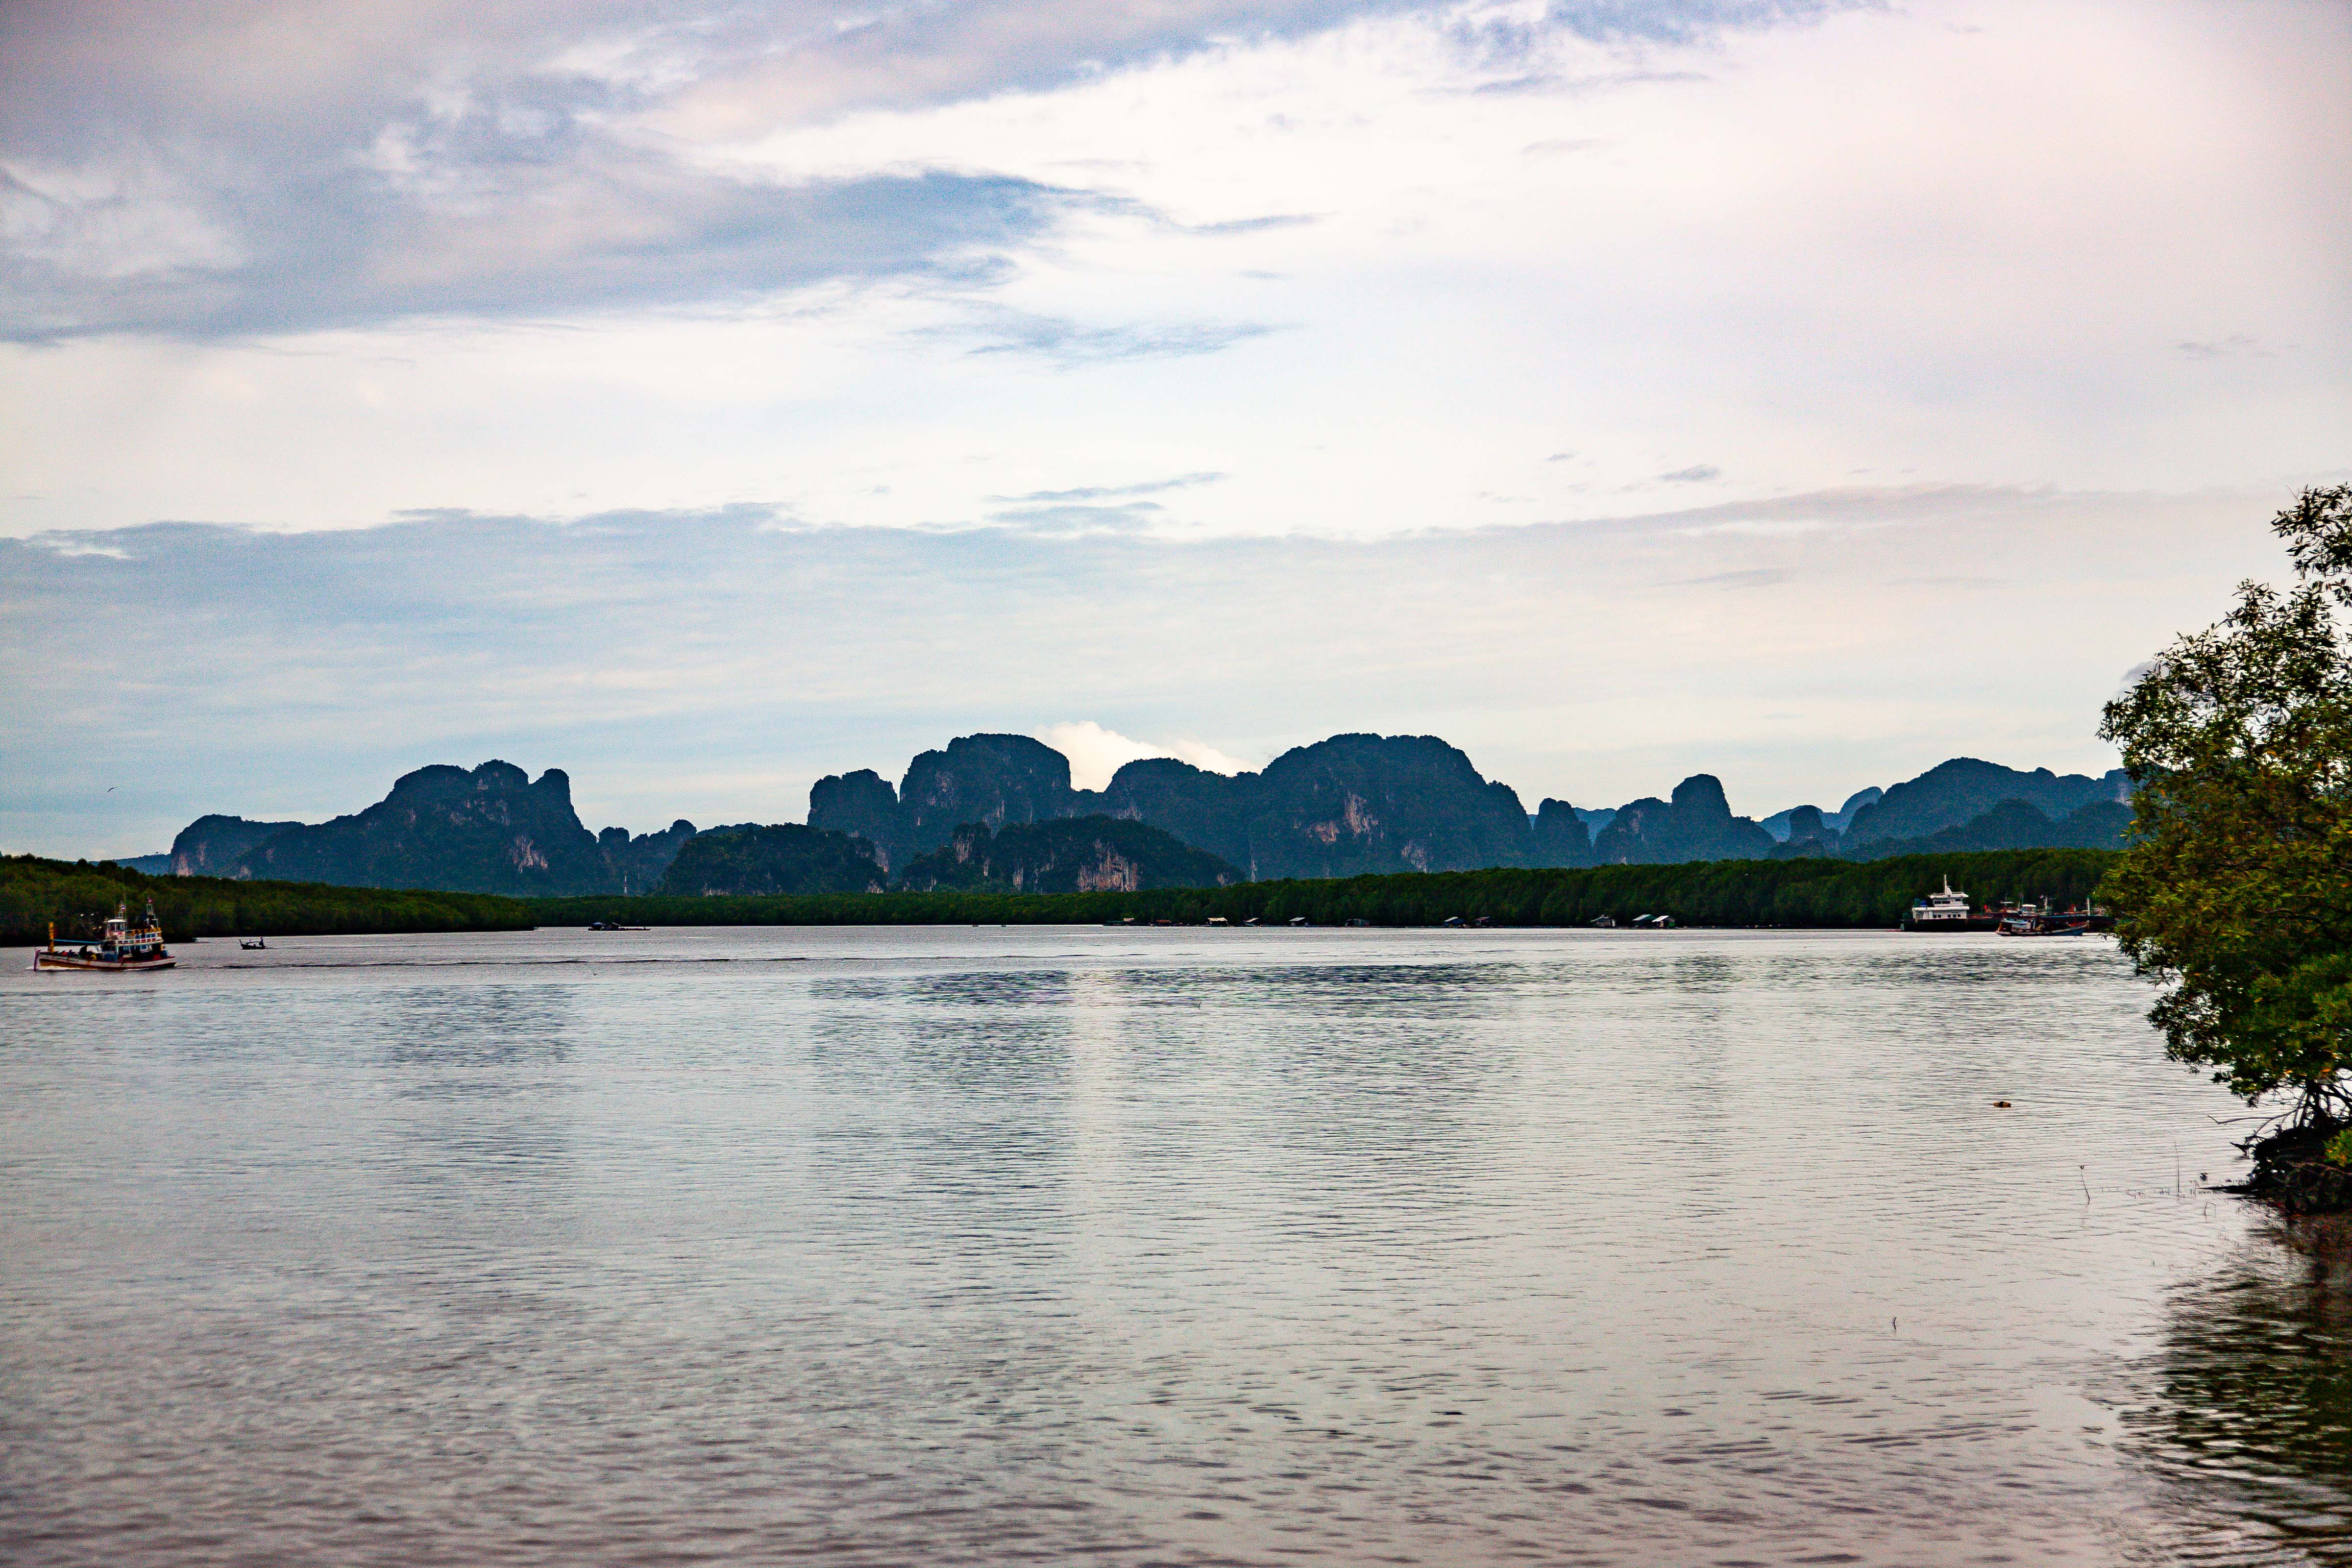 Thailand, Krabi Prov, Mountains From Water, 2009, IMG 2021